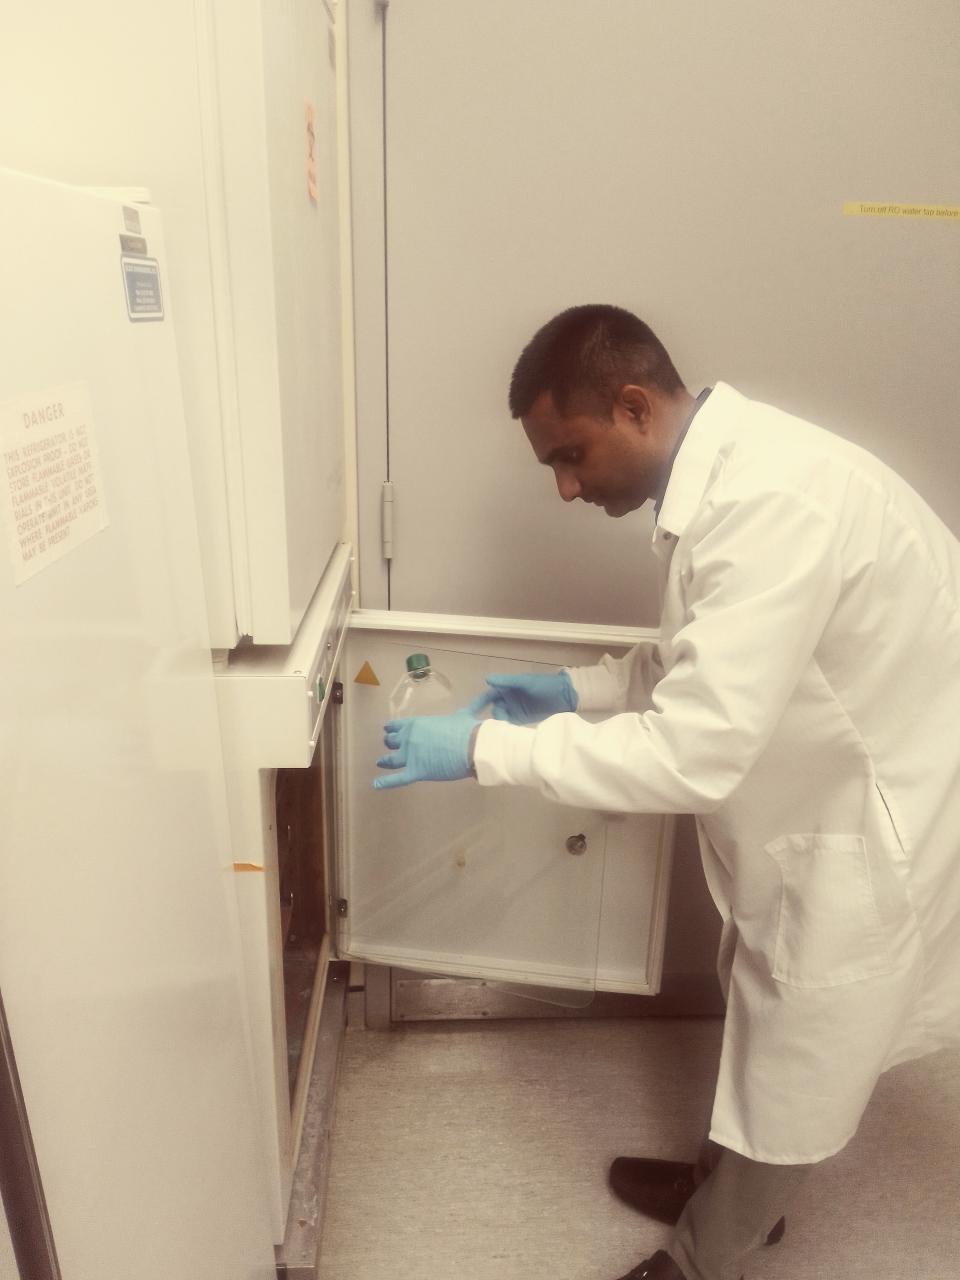 Muddassar Iqbal, wearing a lab coat and gloves, puts a sample into a refrigerator